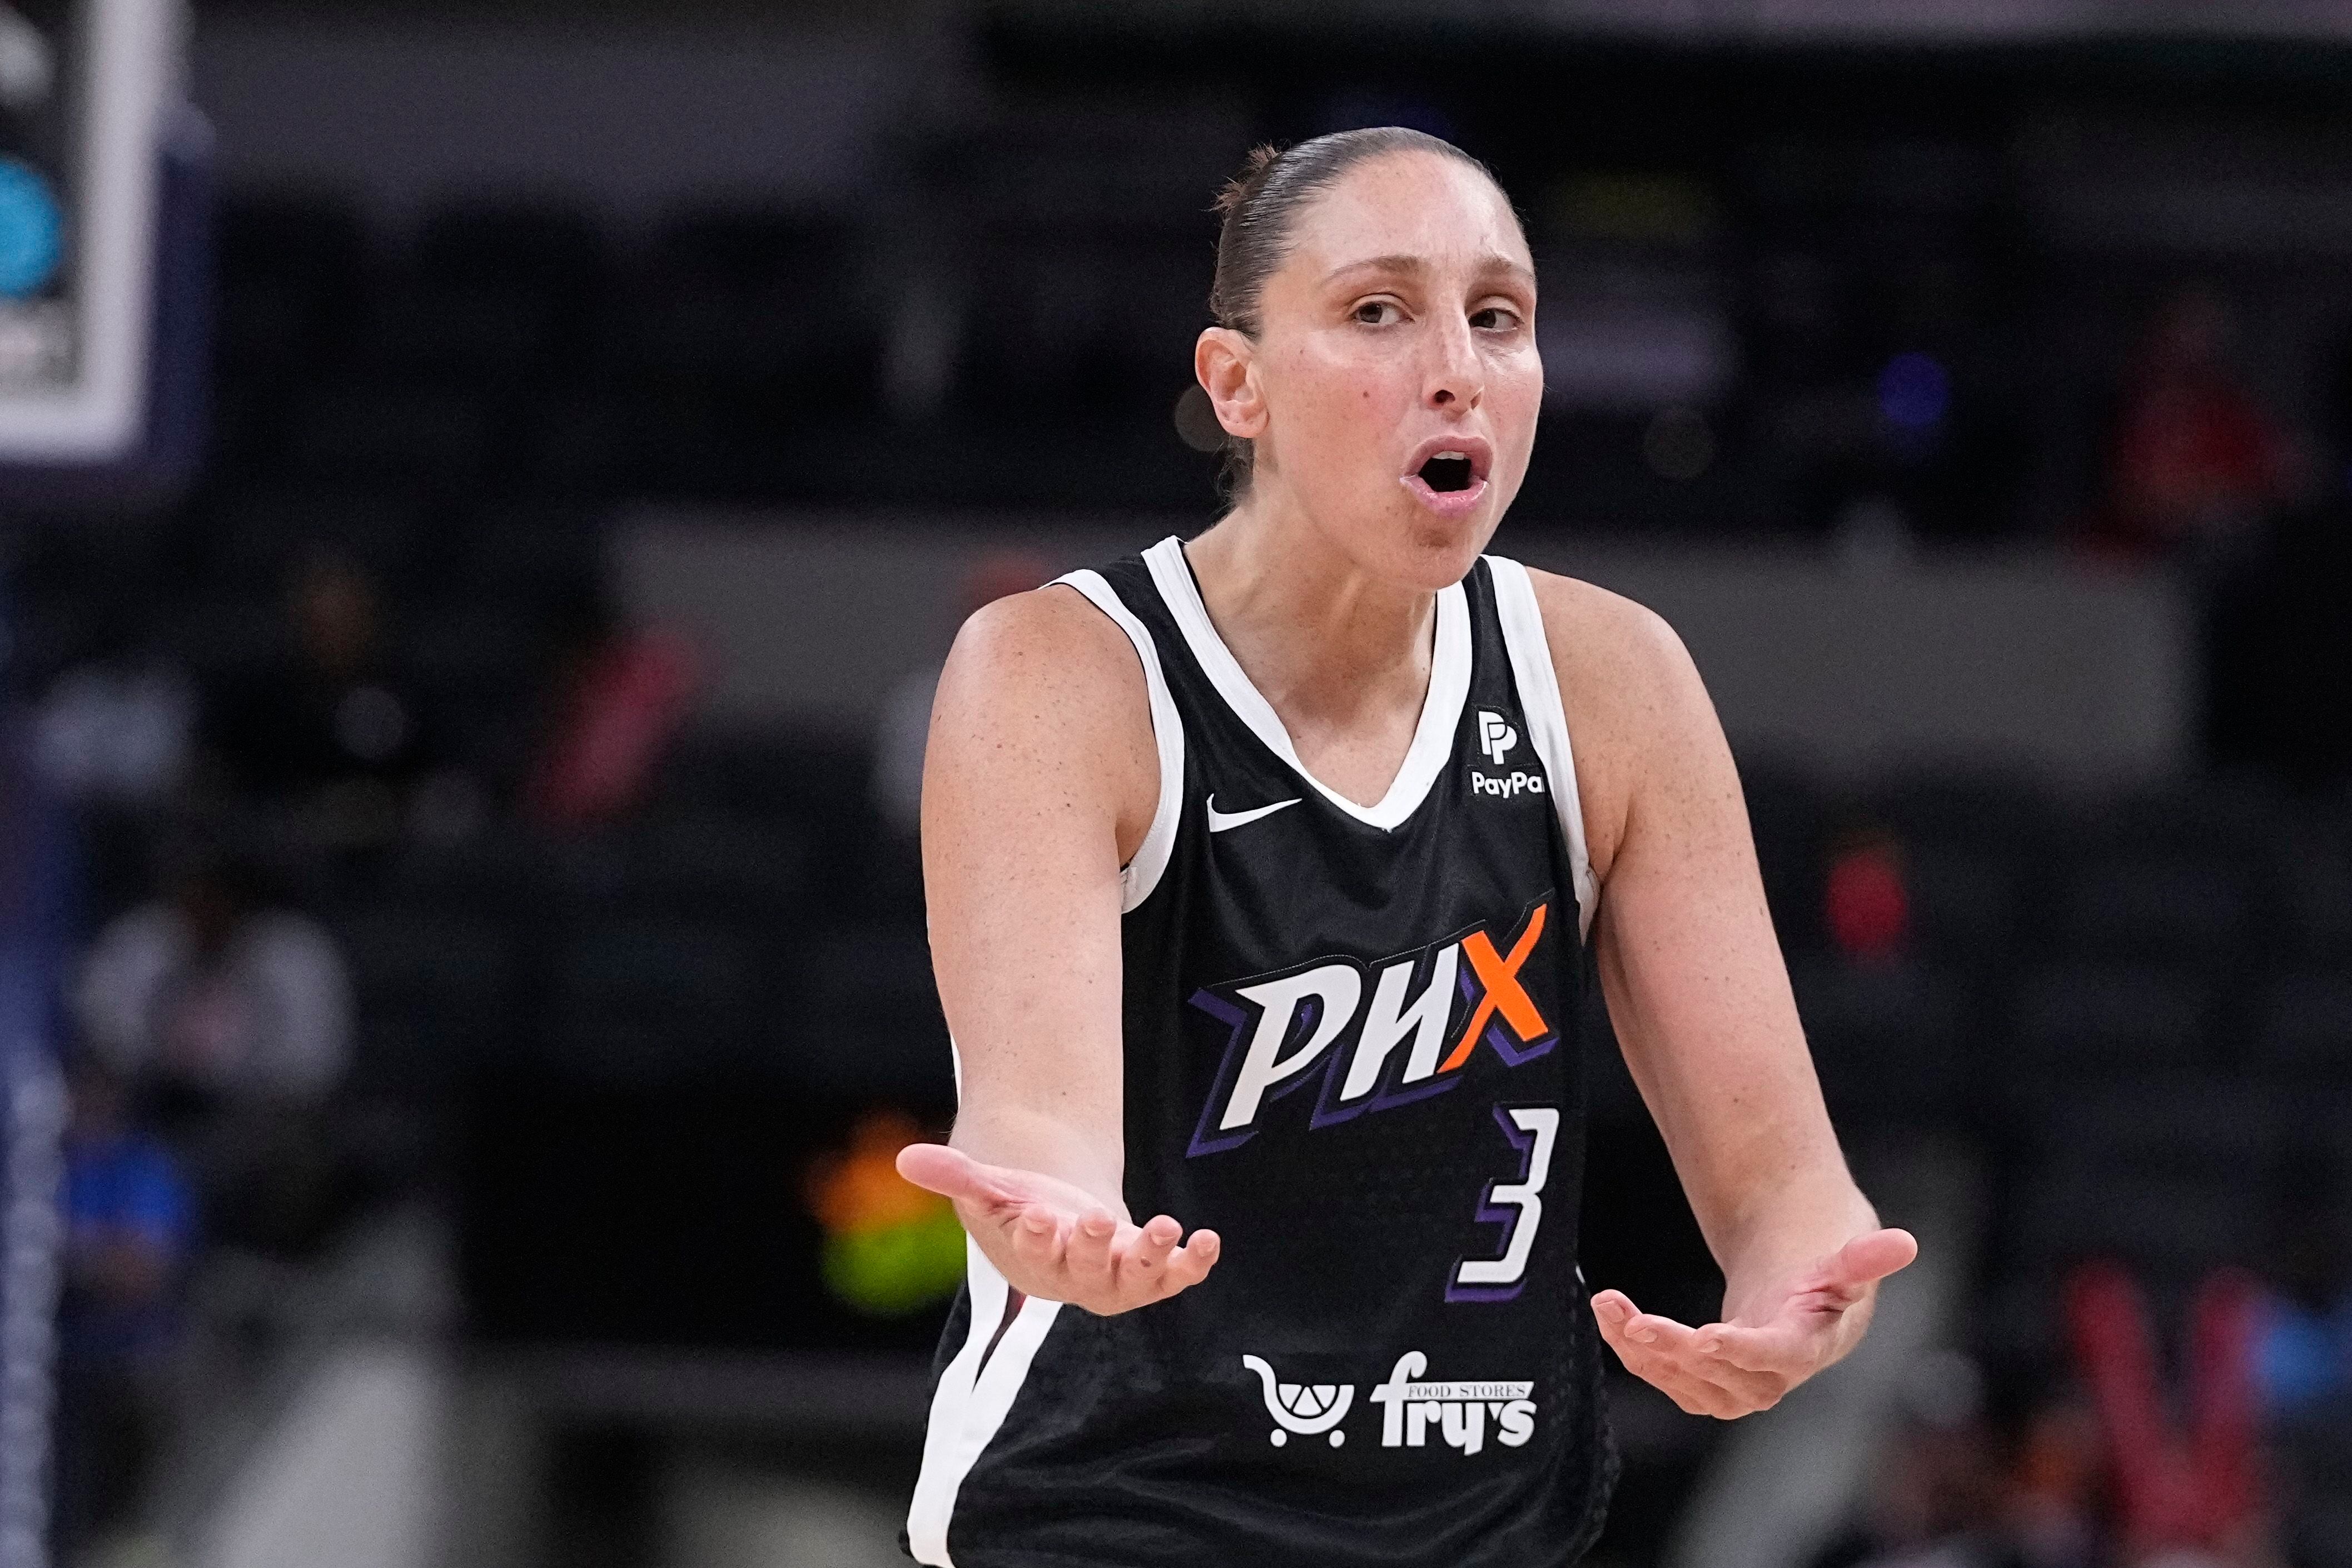 Diana Taurasi hits 10,000 points for another milestone in her standout  career